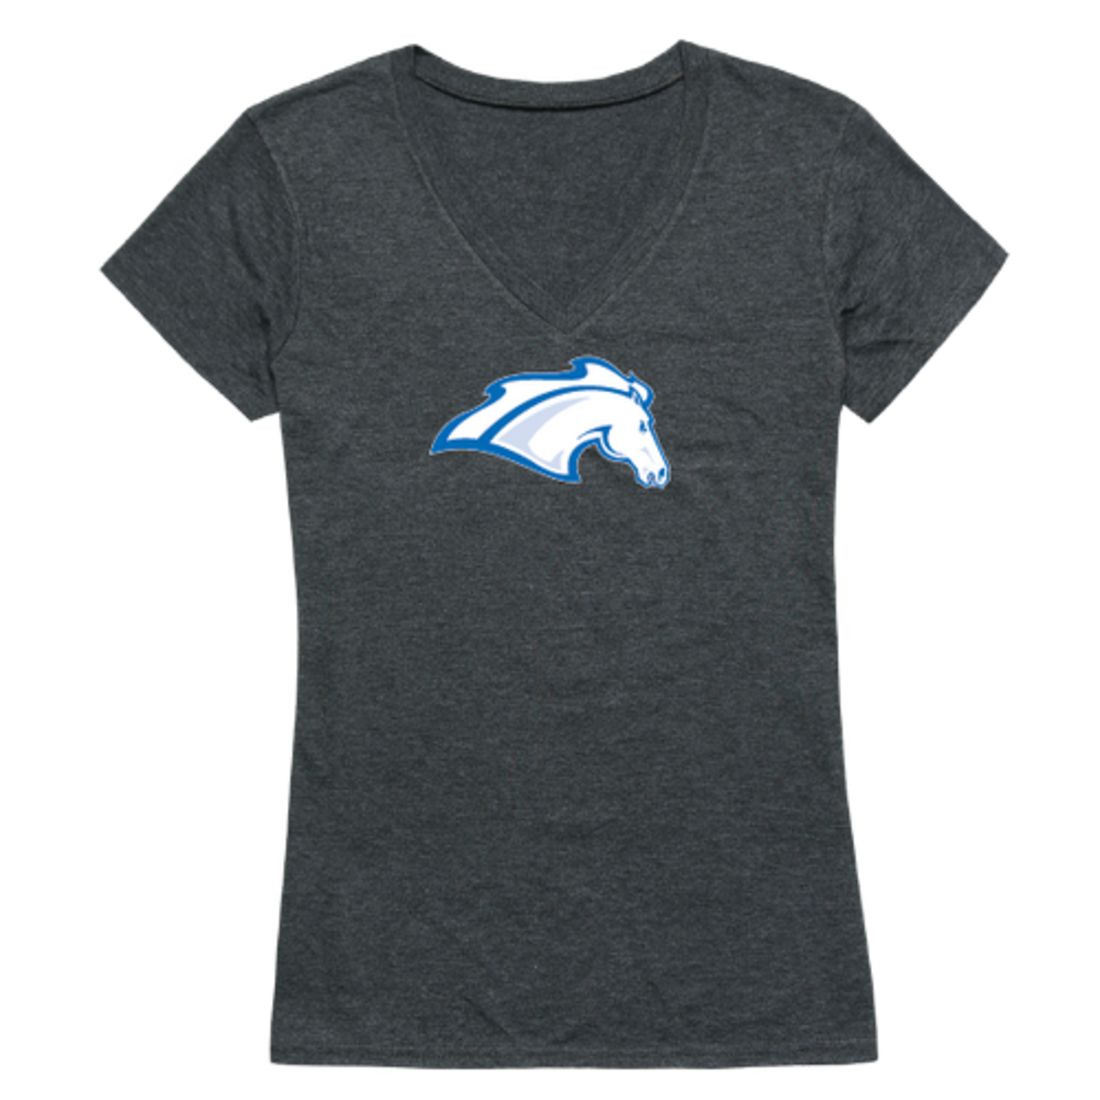 The University of Alabama in Huntsville Chargers Womens Cinder T-Shirt Tee